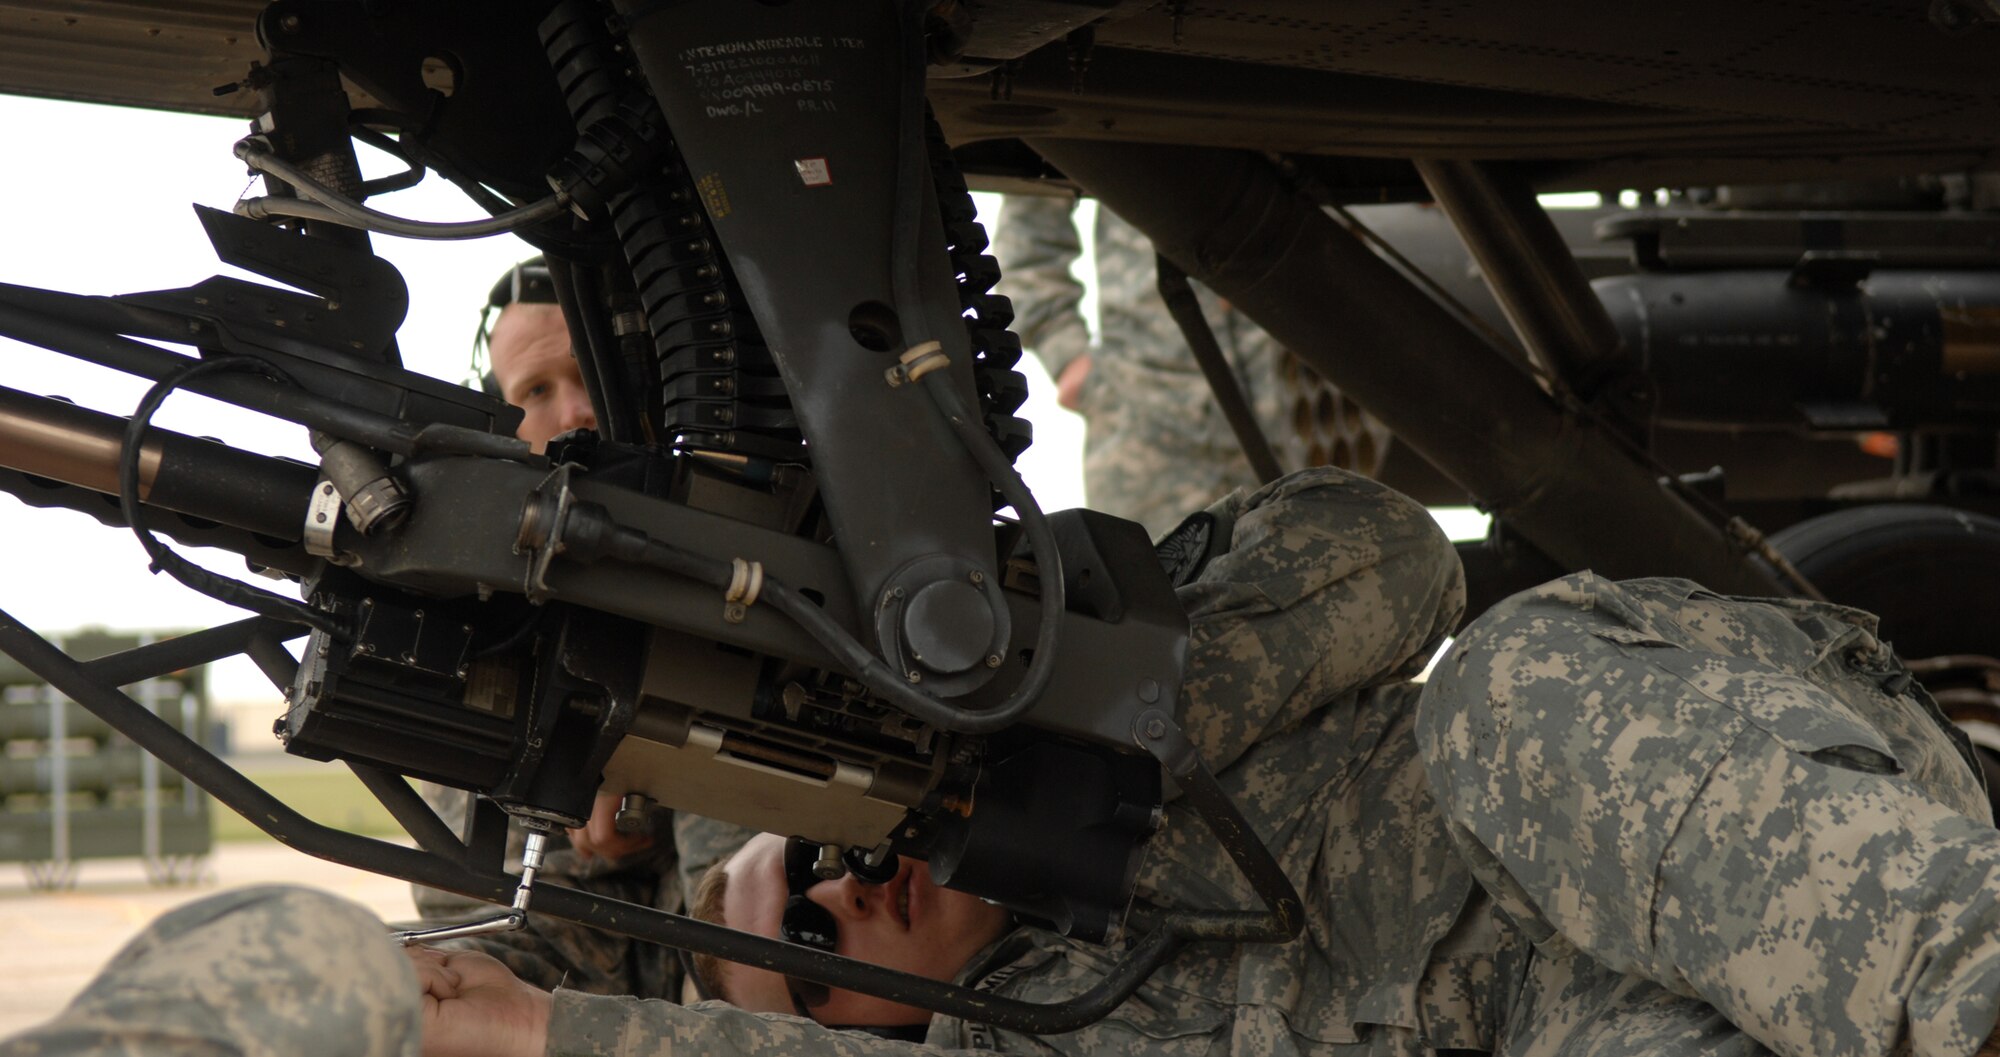 WHITEMAN AIR FORCE BASE, Mo. – Army Staff Sgt. Brandon Isbell & Army Sgt.Brian Pummill, both from the 1-135th Attack Recon Battalion, clear a 30mm gun for loading Sept. 6. The Missouri Army National Guard’s 1-135th Attack Recon Battalion recently implemented a new training program that allows pilots to arm and fly three AH-64 Apache helicopters from Whiteman AFB to Fort Leonard Wood for the first time to practice aerial gunnery at their monthly drill. (U.S. Air Force photo/Senior Airman Stephen Linch)